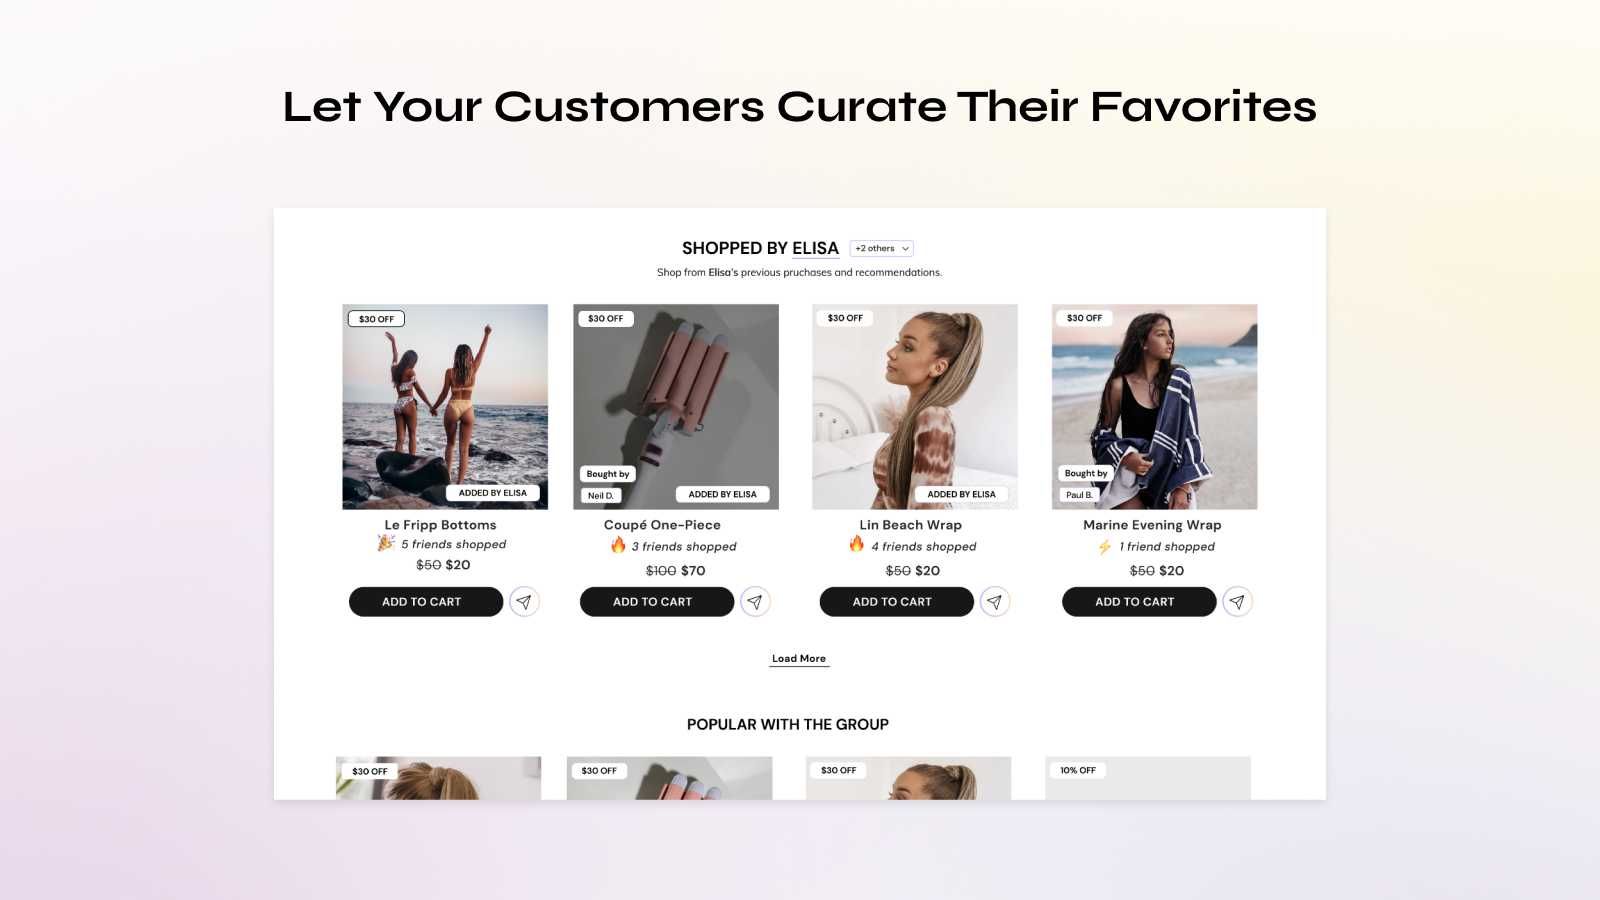 Let your customers curate their favorites